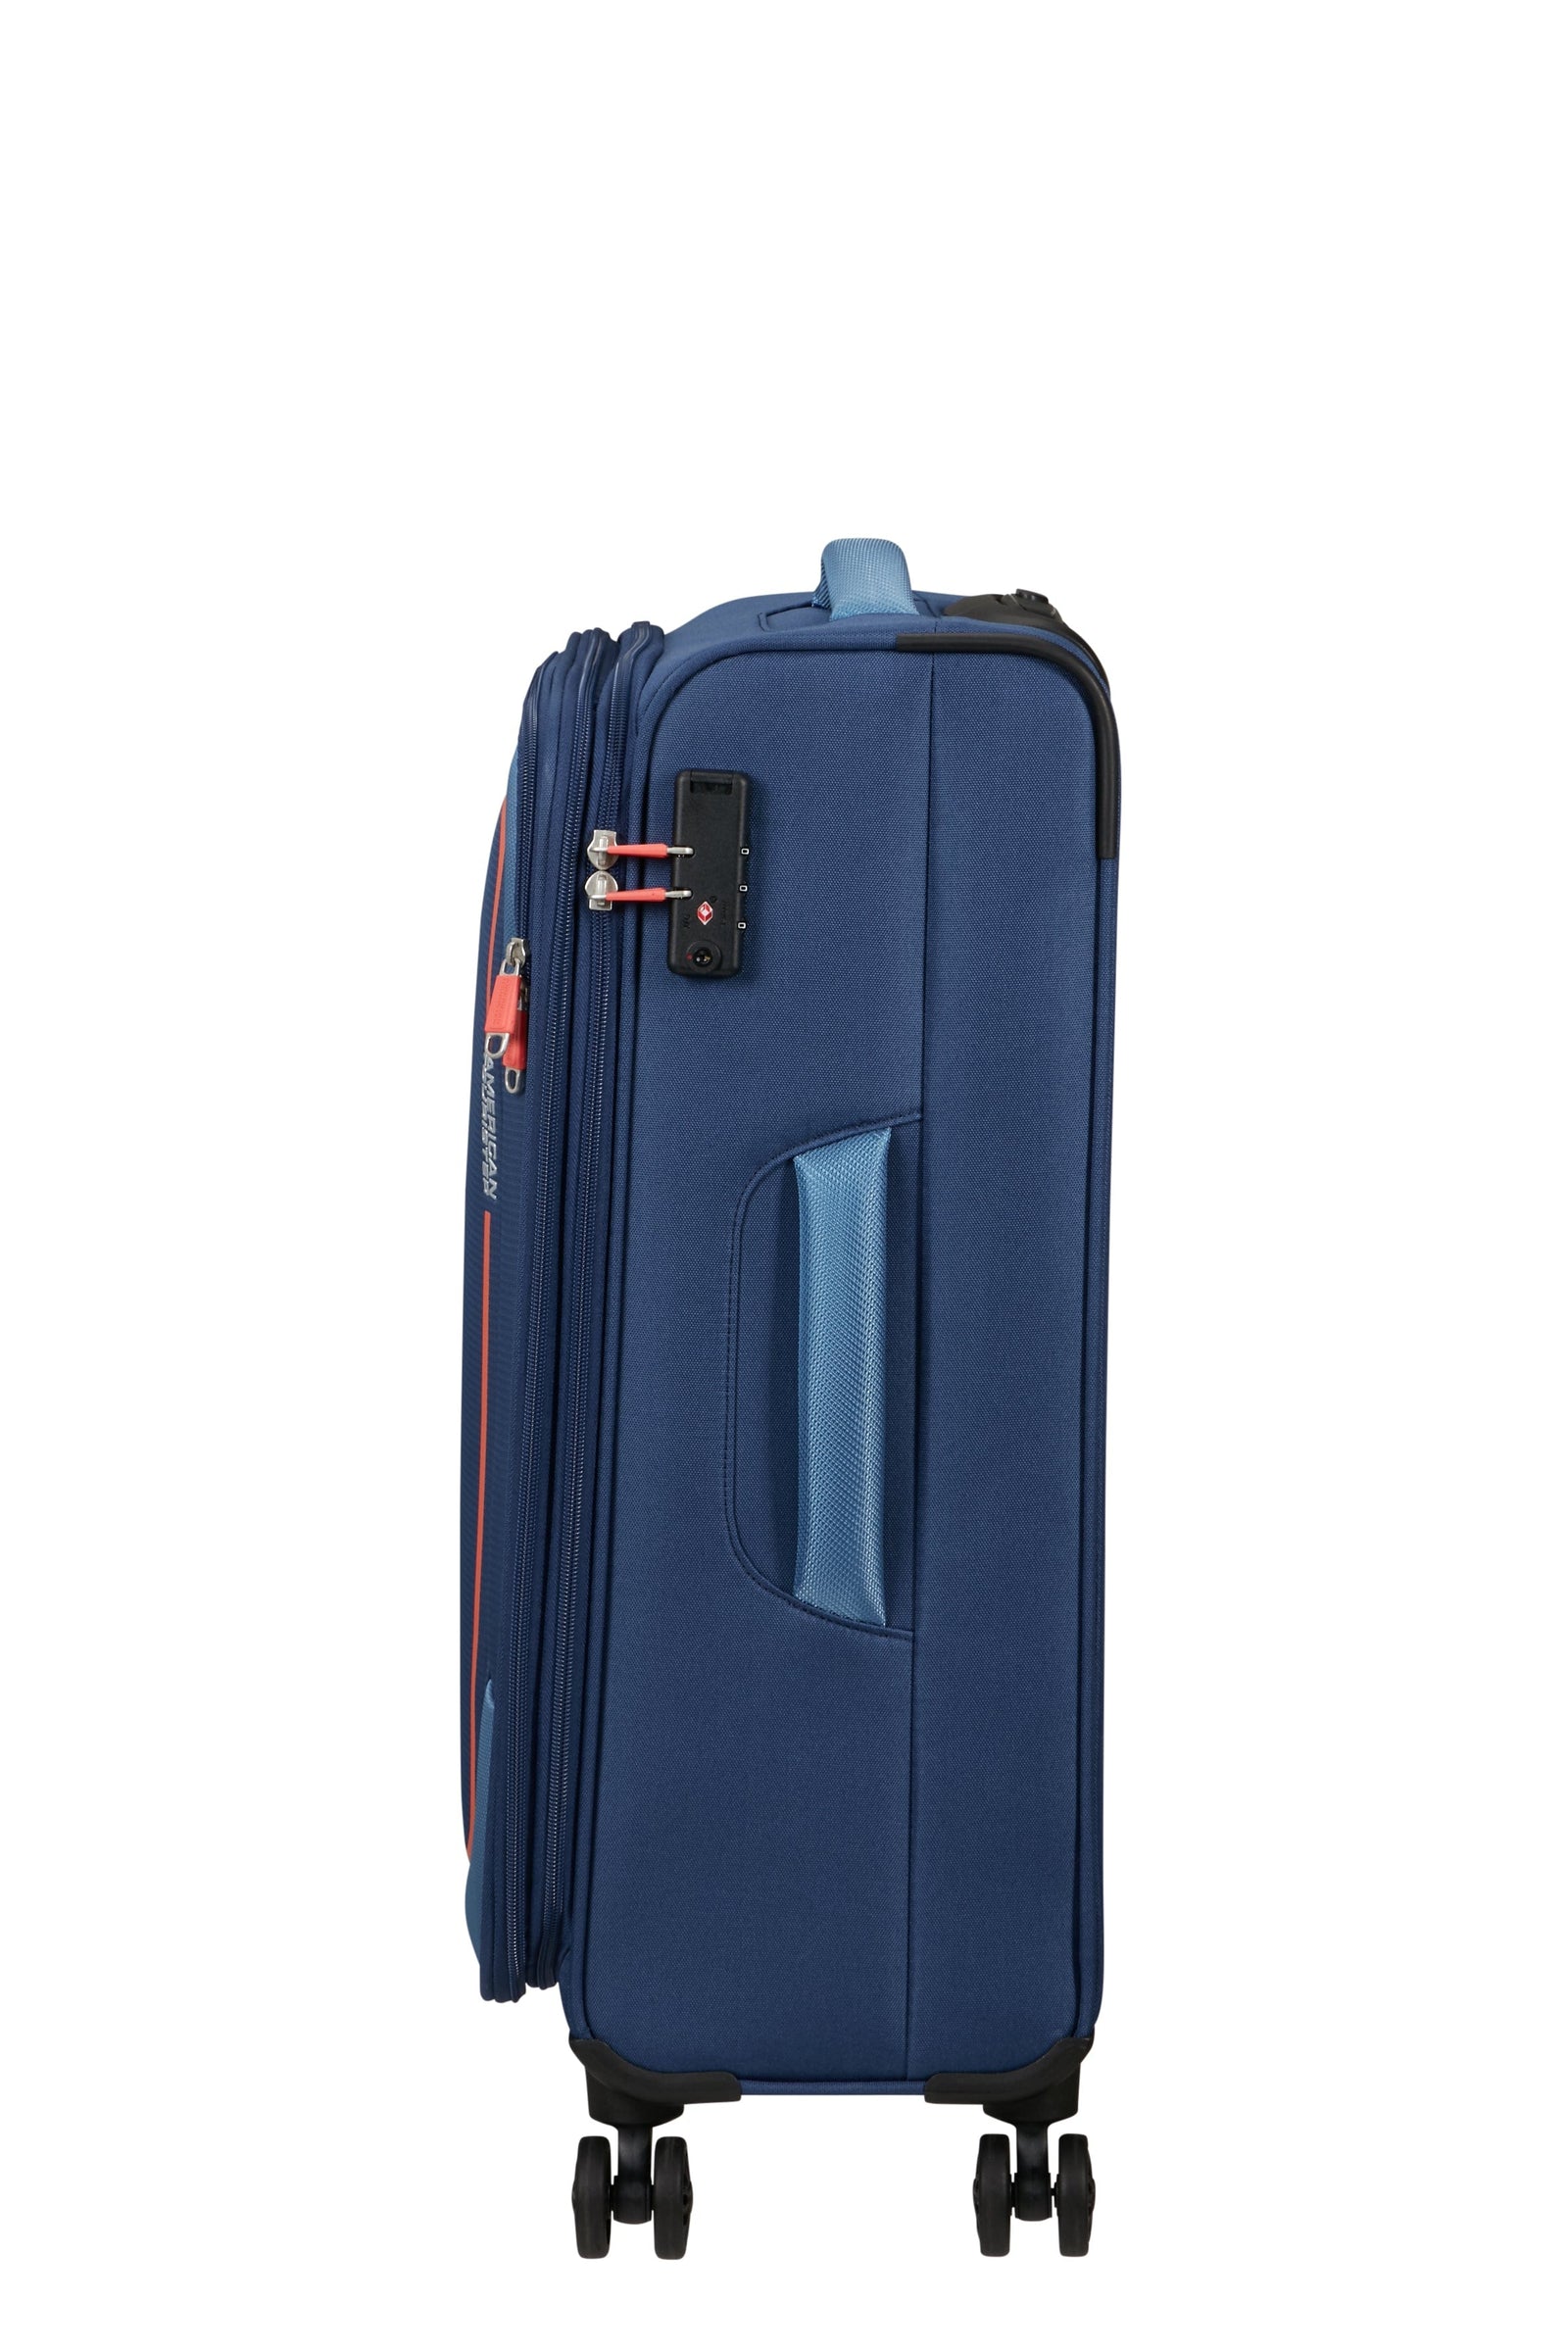 American Tourister Pulsonic Spinner 68 Exp Combat Navy